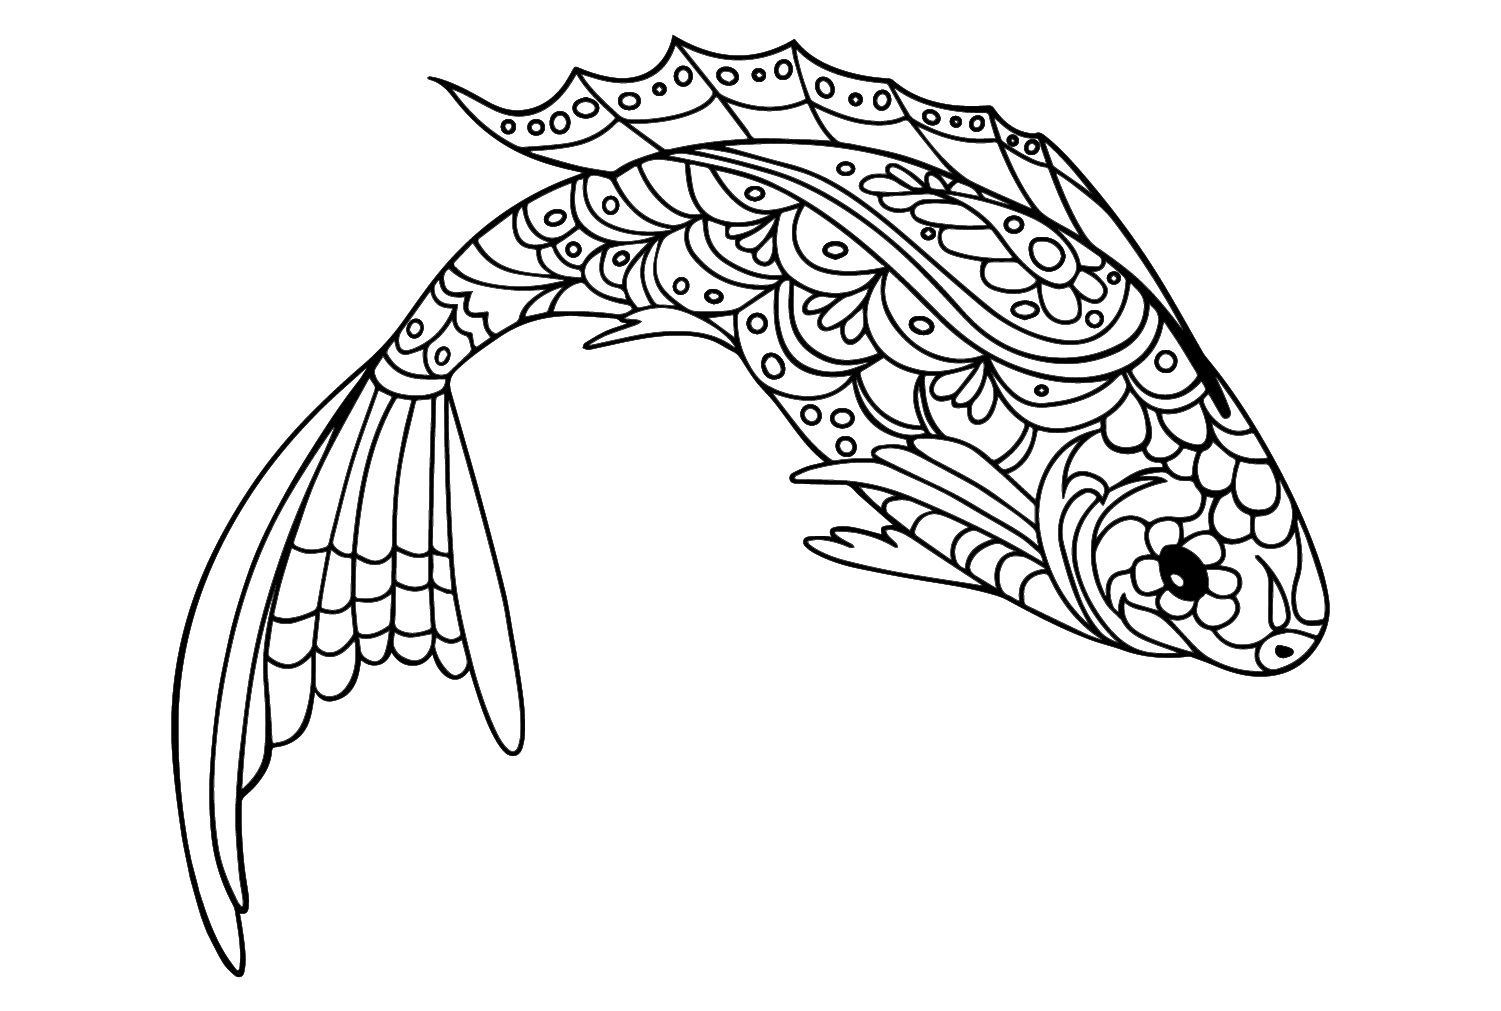 Zentangle Fish Coloring Page - Free Printable Coloring Pages